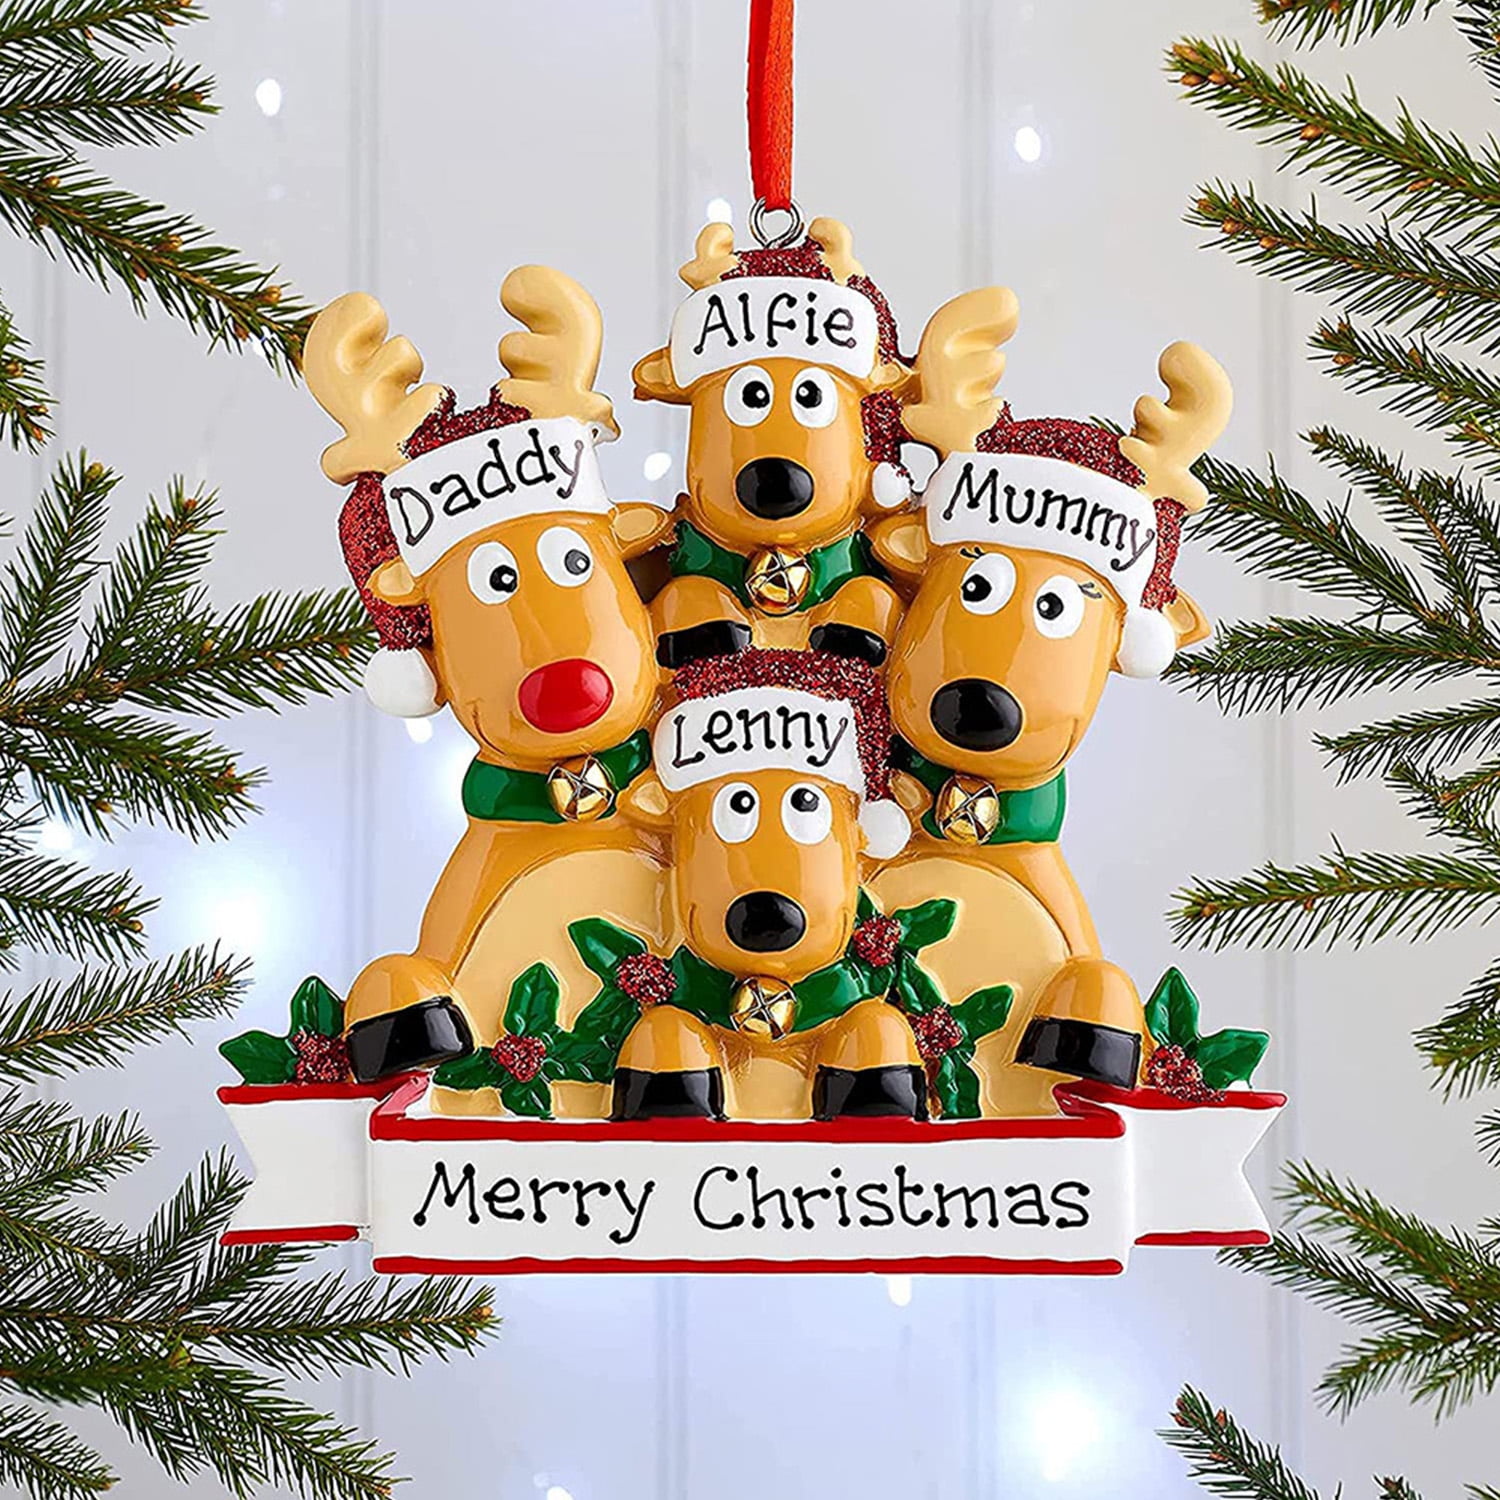 Family of 2-3-4-5! Deer Family Personalized 2020 Christmas ornaments for tree